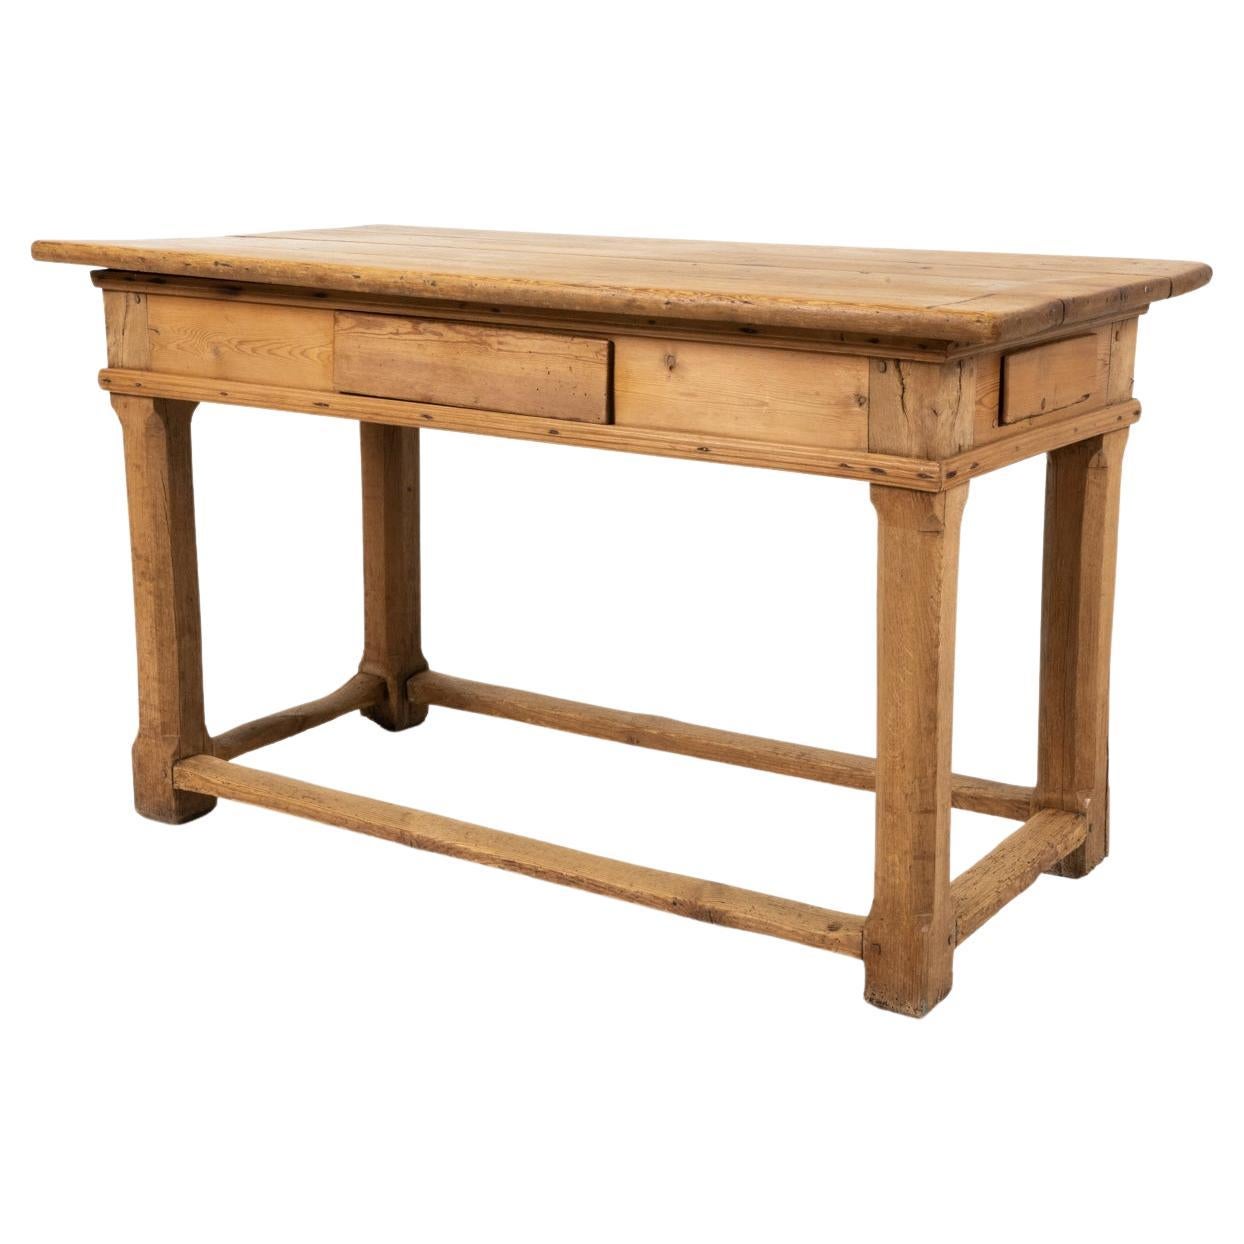 18th C. Danish Baroque Pine Table or Desk For Sale